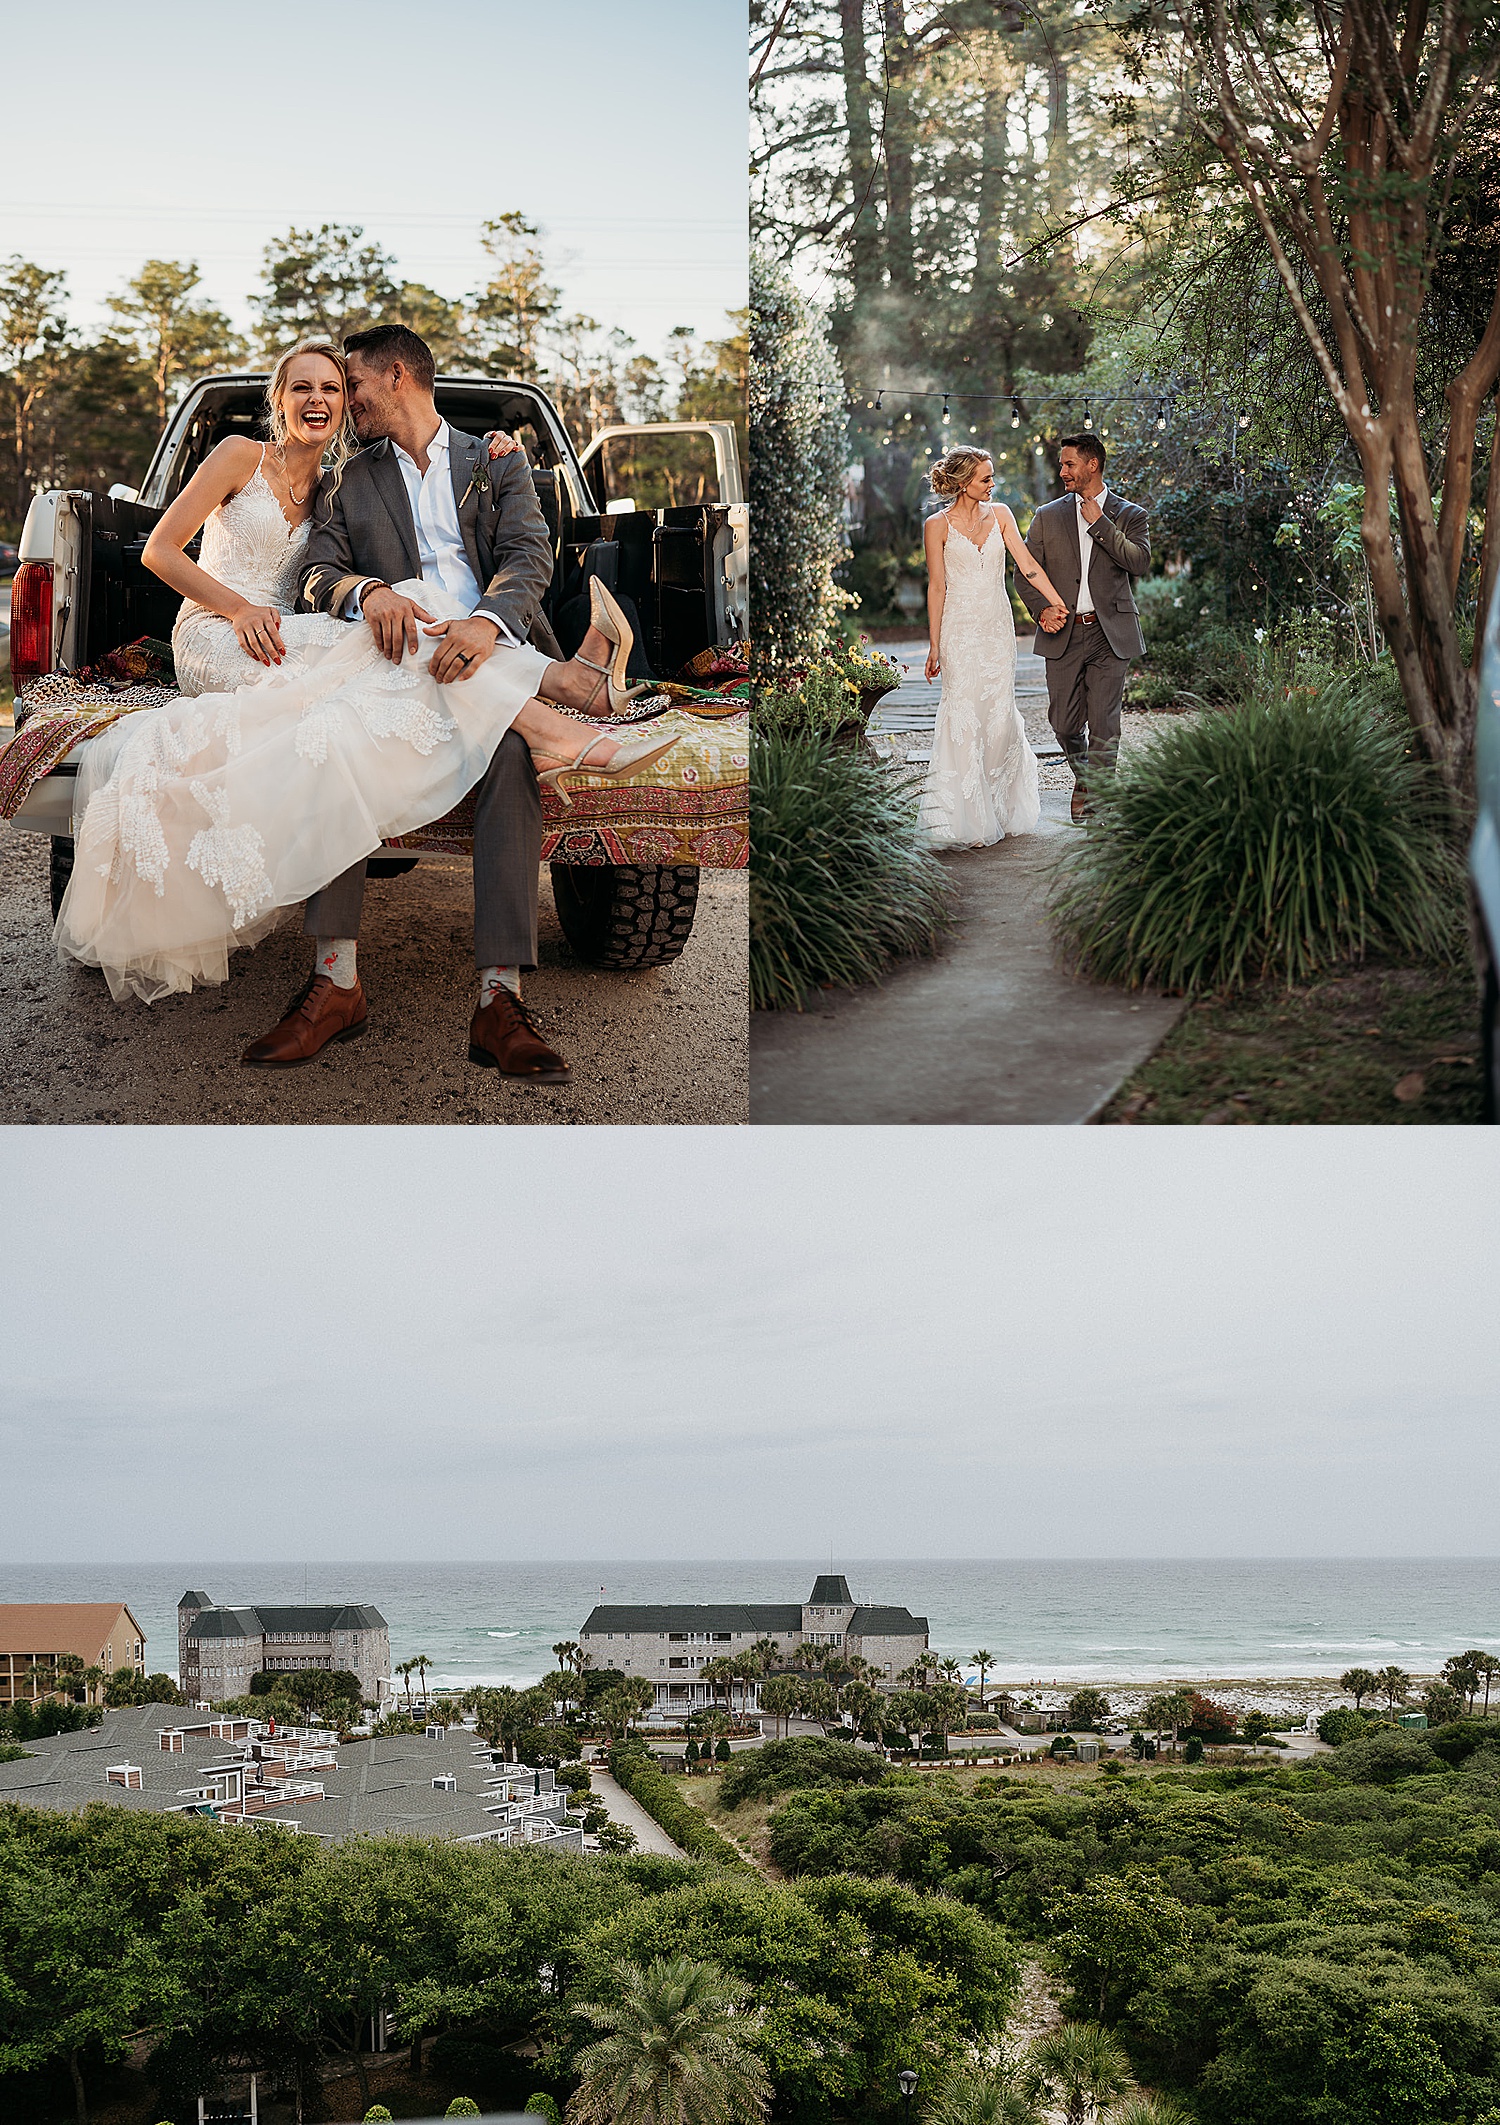 Destin wedding venue with bride and groom for Emily Burns photo